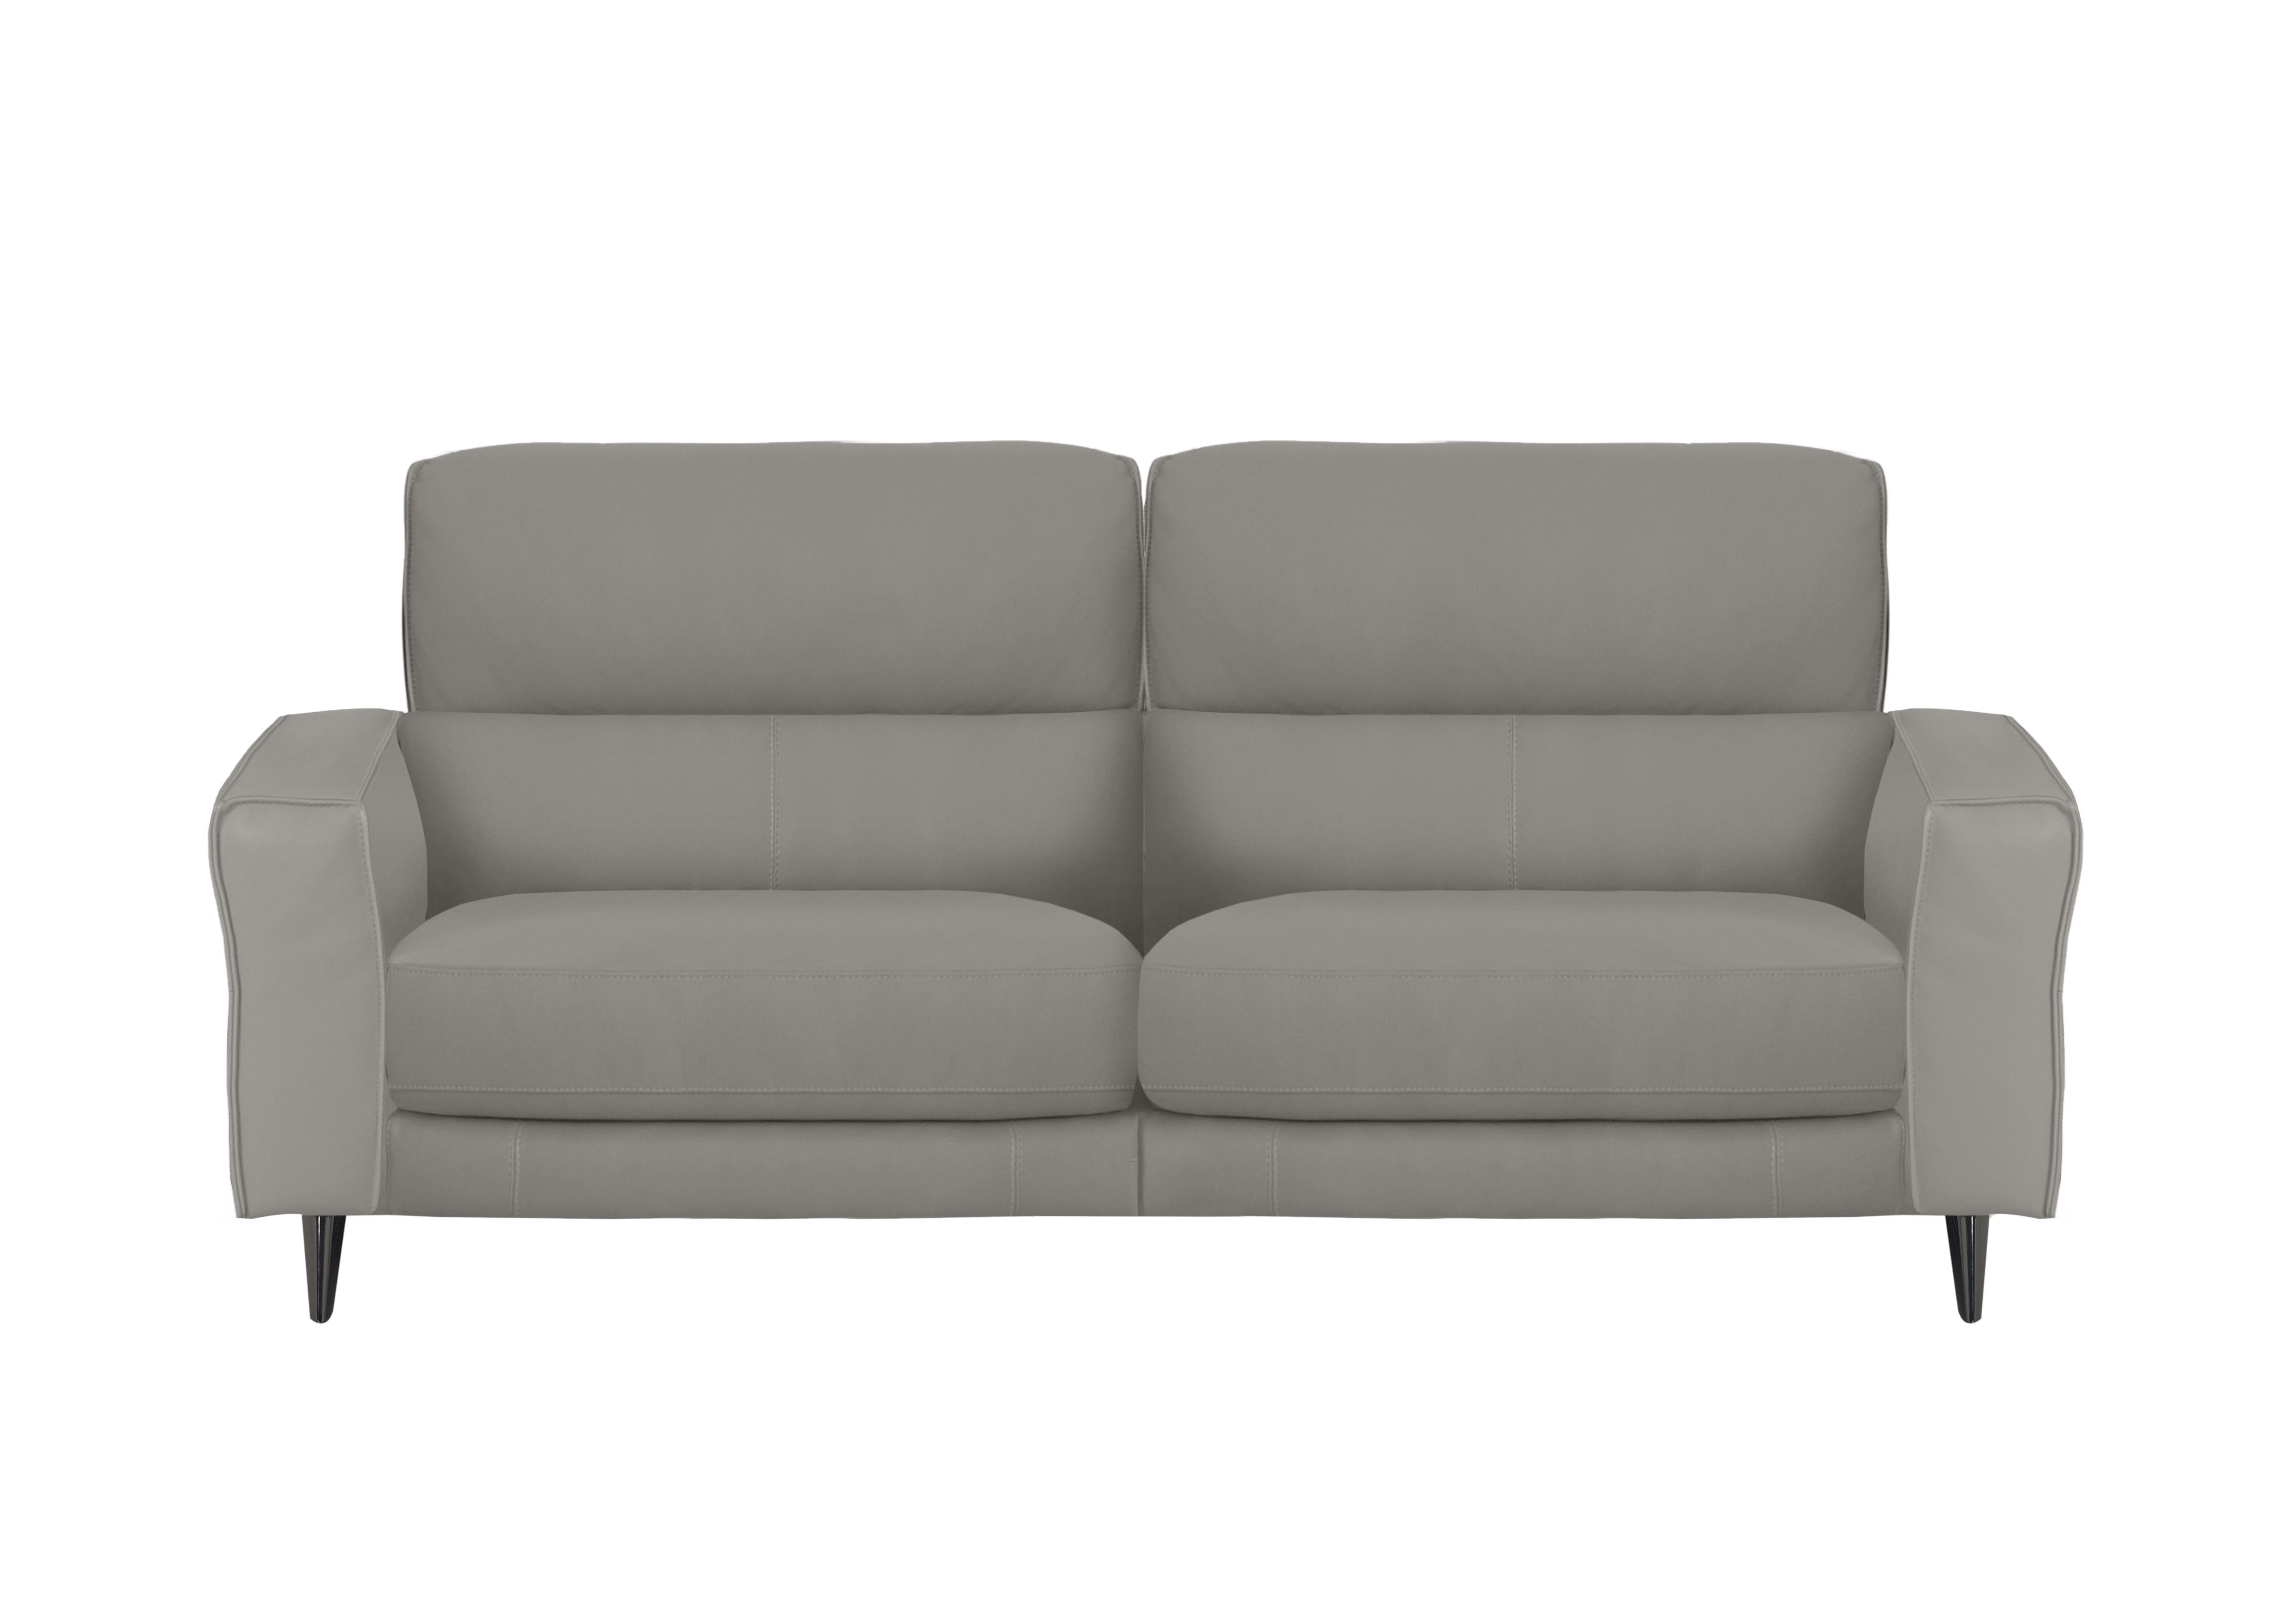 Axel 3 Seater Leather Sofa in Bv-946b Silver Grey on Furniture Village